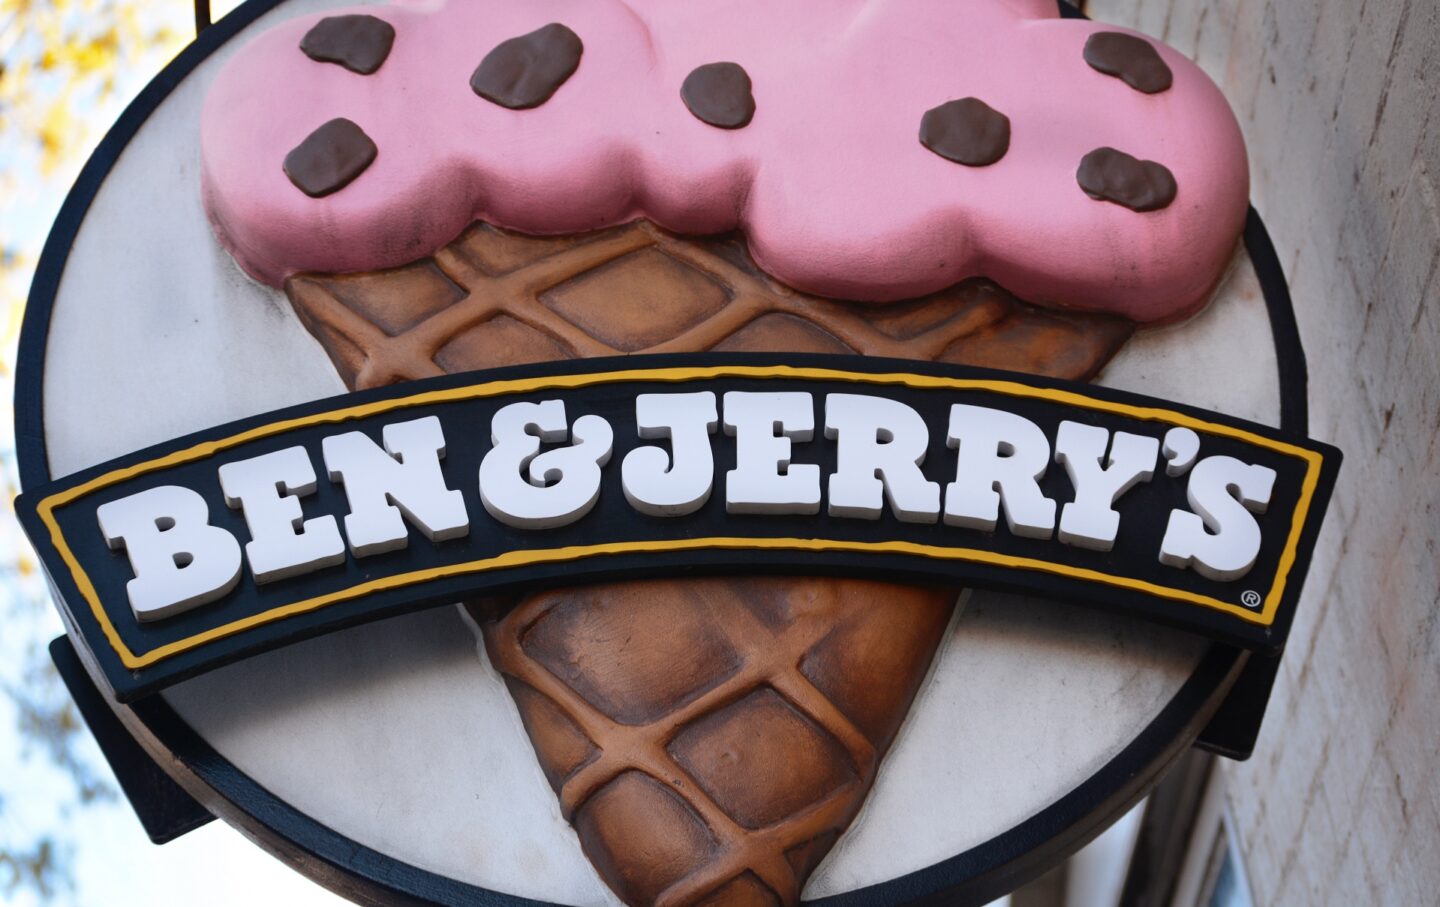 Ben and Jerry's sign